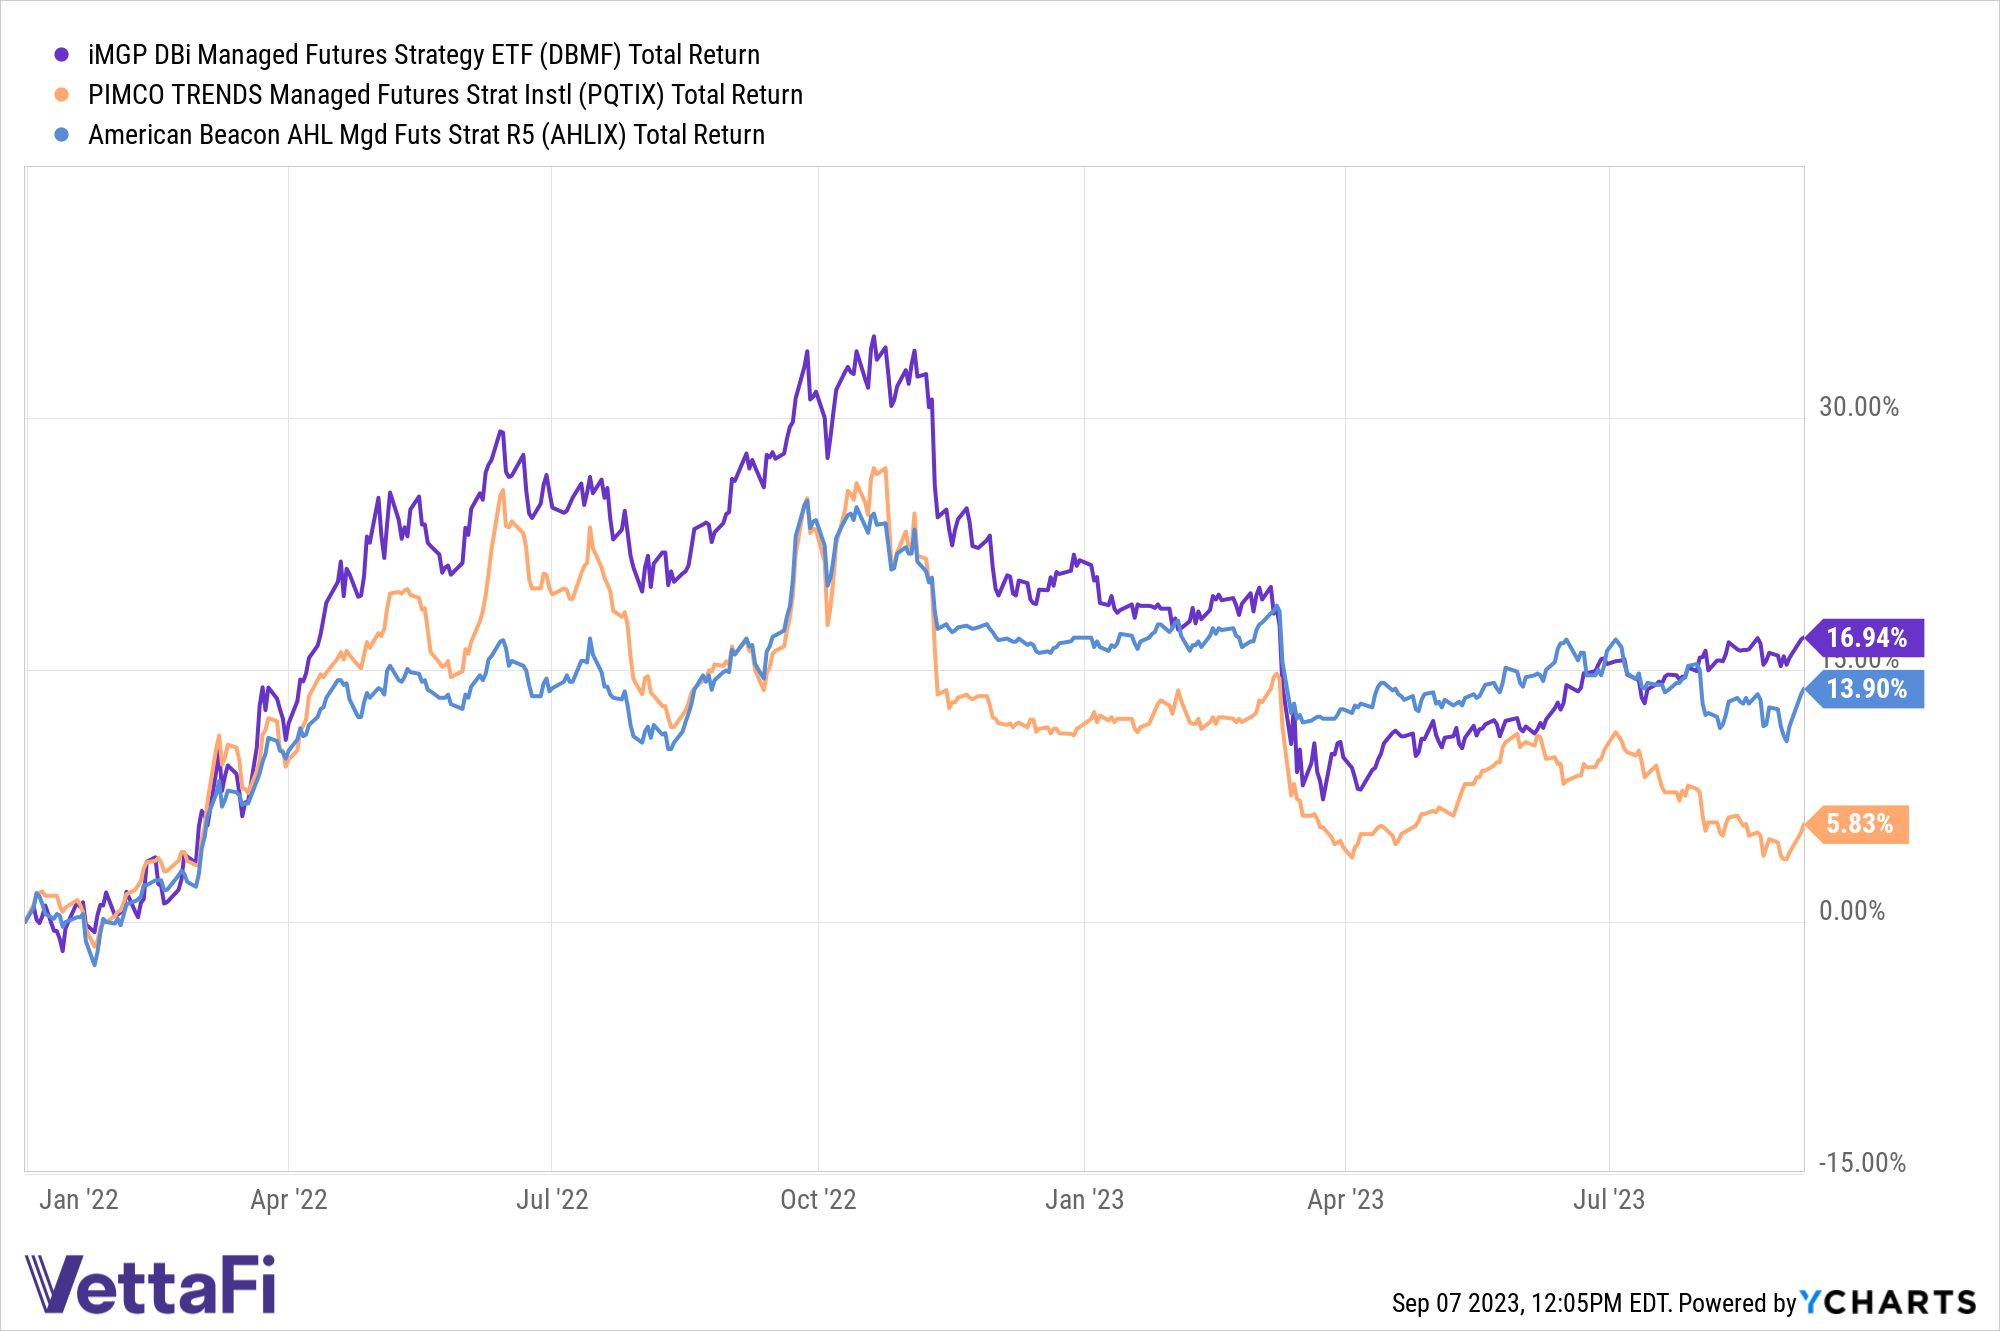 Total returns chart of DBMF, PIMCO's PQTIX, and American Beacon's AHLIX from January 1, 2022 to present. 